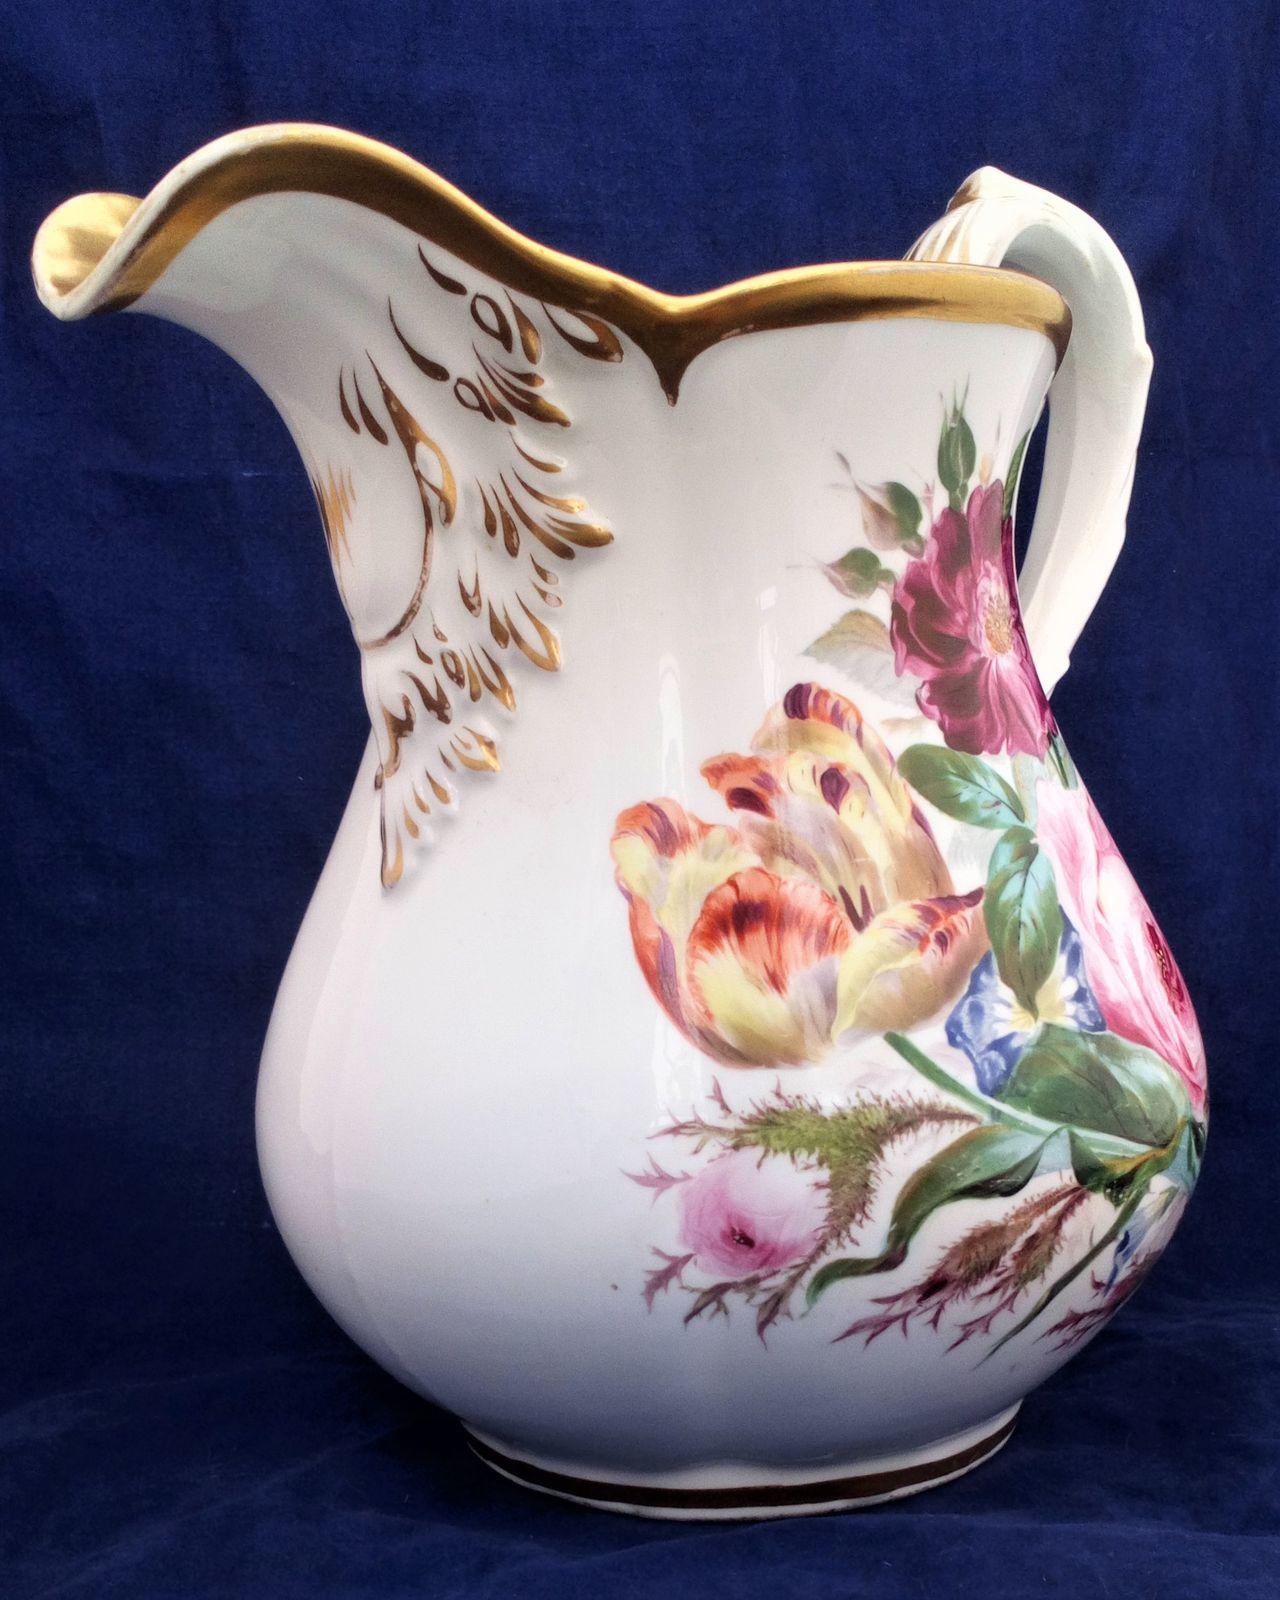 A large antique five pint capacity porcelain jug made by John Rose of  Coalport probably painted by William Billingsley with Flowers circa 1825. It is 10 inches high.